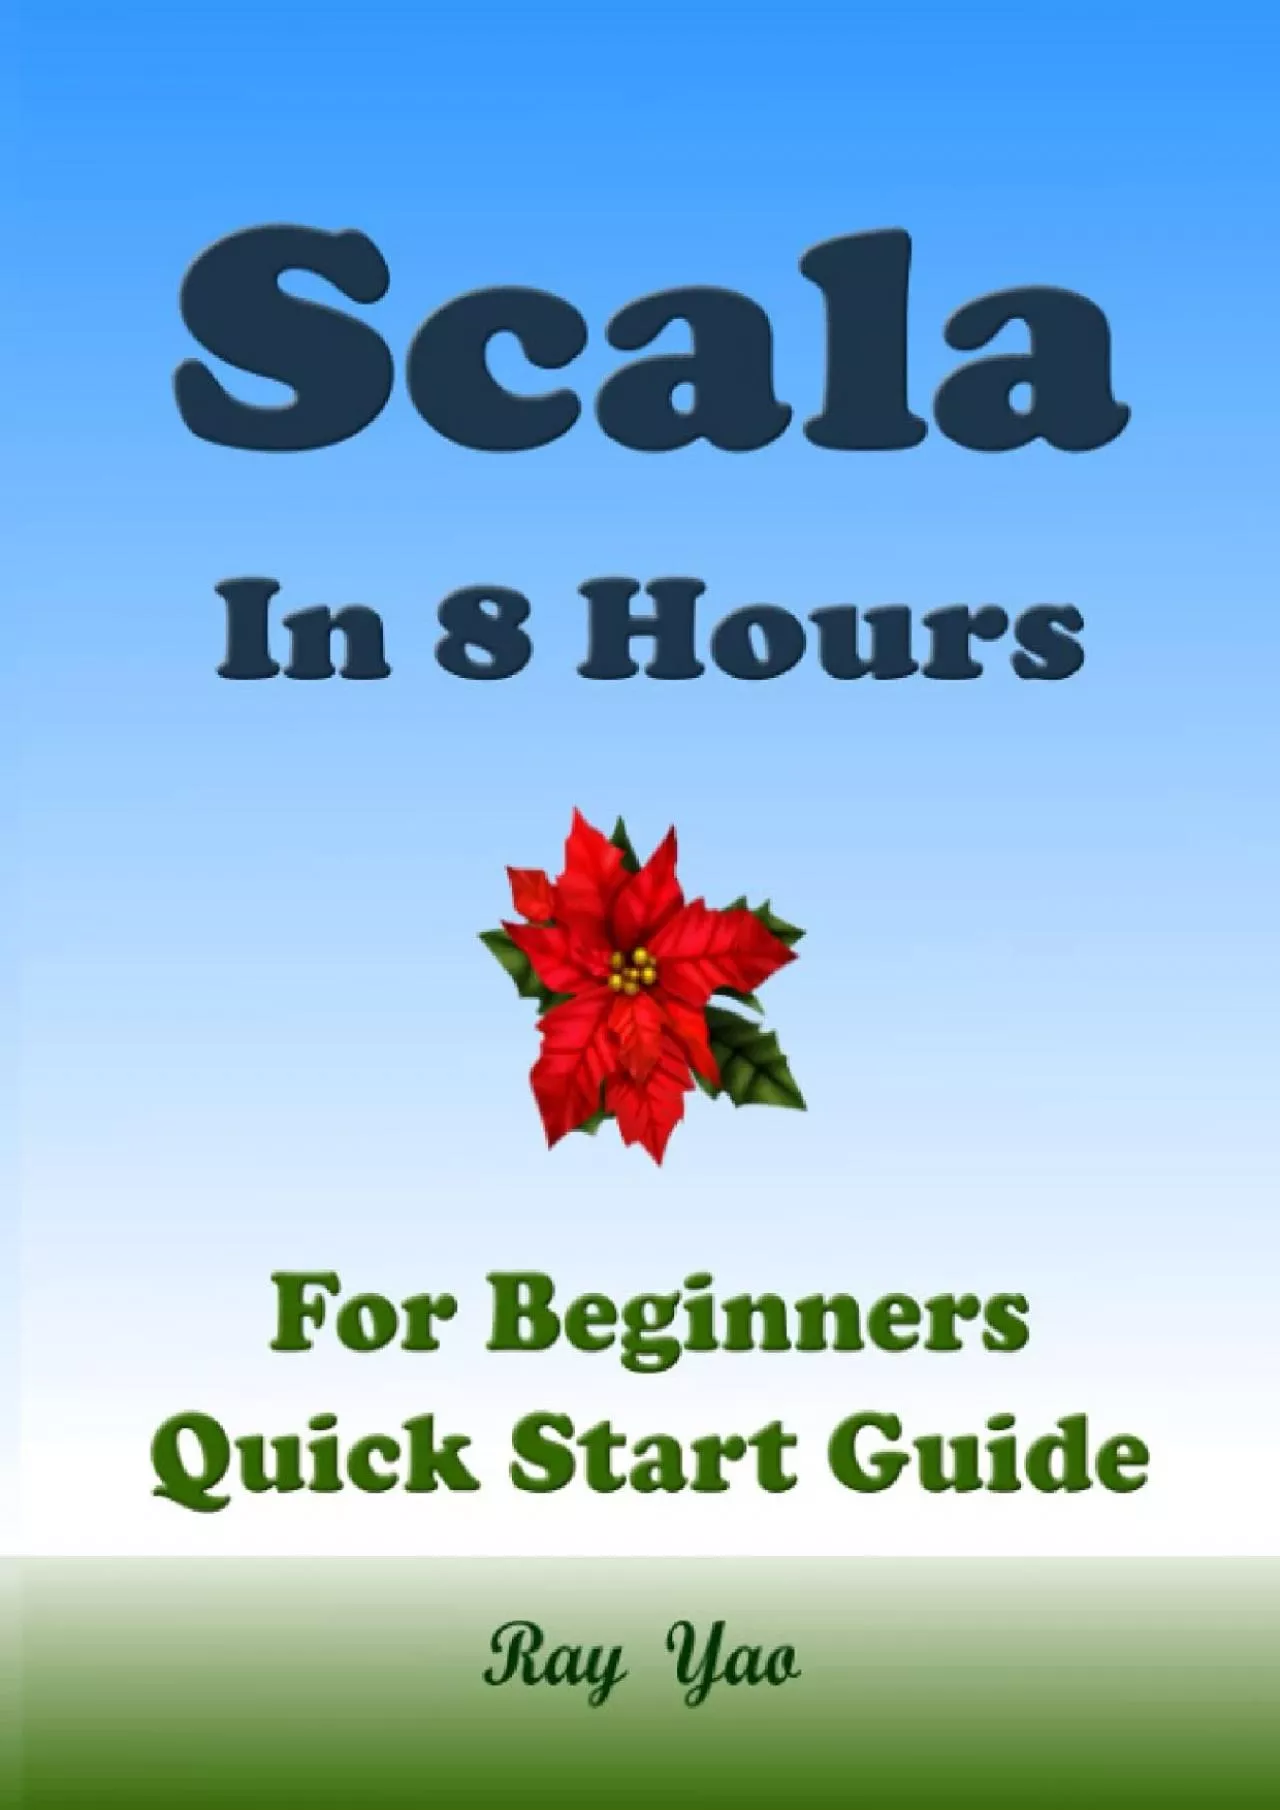 [READING BOOK]-SCALA in 8 Hours, For Beginners, Learn Coding Fast: Scala Quick Start Guide